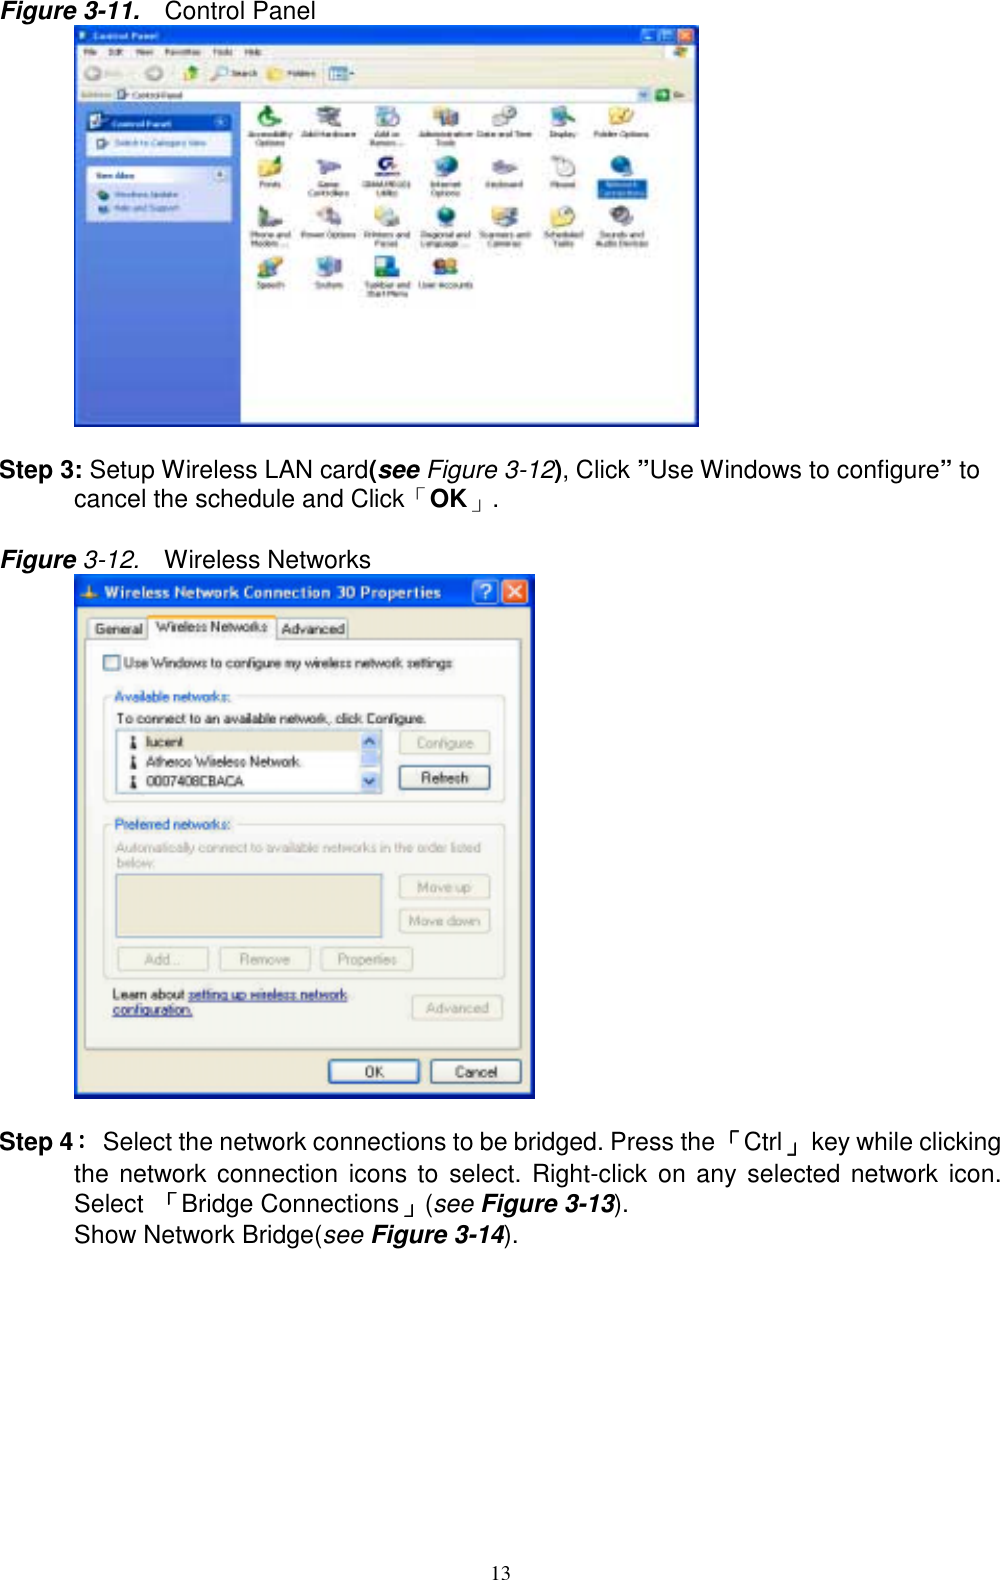 13Figure 3-11.   Control Panel      Step 3: Setup Wireless LAN card(see Figure 3-12), Click ”Use Windows to configure” tocancel the schedule and Click「OK」.Figure 3-12.  Wireless Networks      Step 4：：：：  Select the network connections to be bridged. Press the 「「「「Ctrl」」」」  key while clickingthe network connection icons to select. Right-click on any selected network icon.Select  「「「「Bridge Connections」」」」(see Figure 3-13).Show Network Bridge(see Figure 3-14).